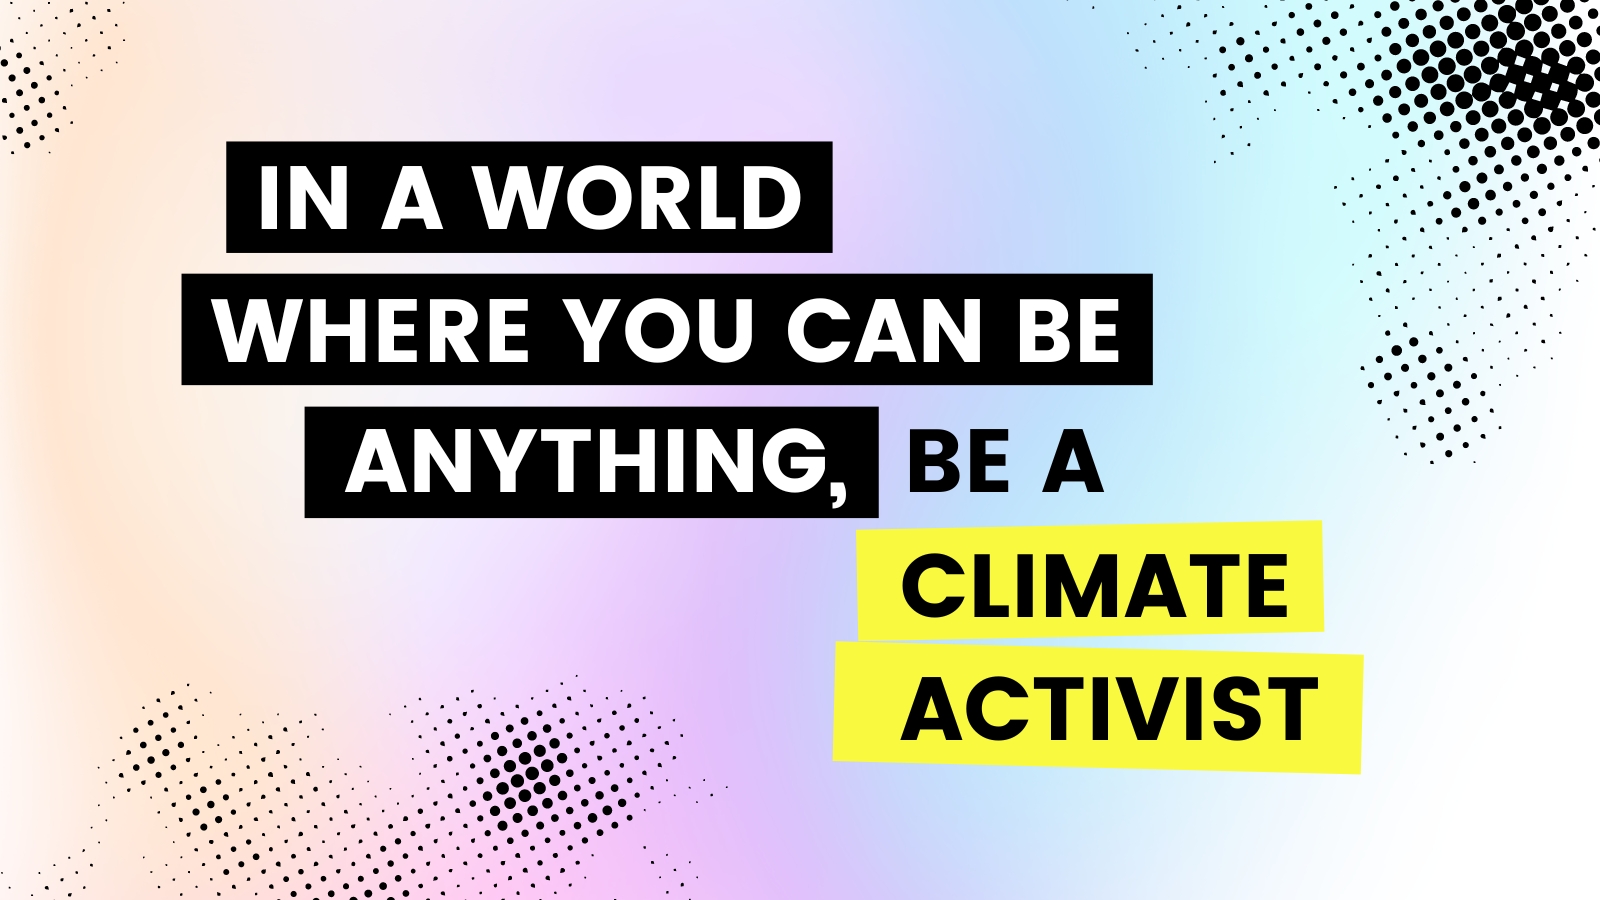 In a World Where You Can Be Anything, Be a Climate Activist
                                  